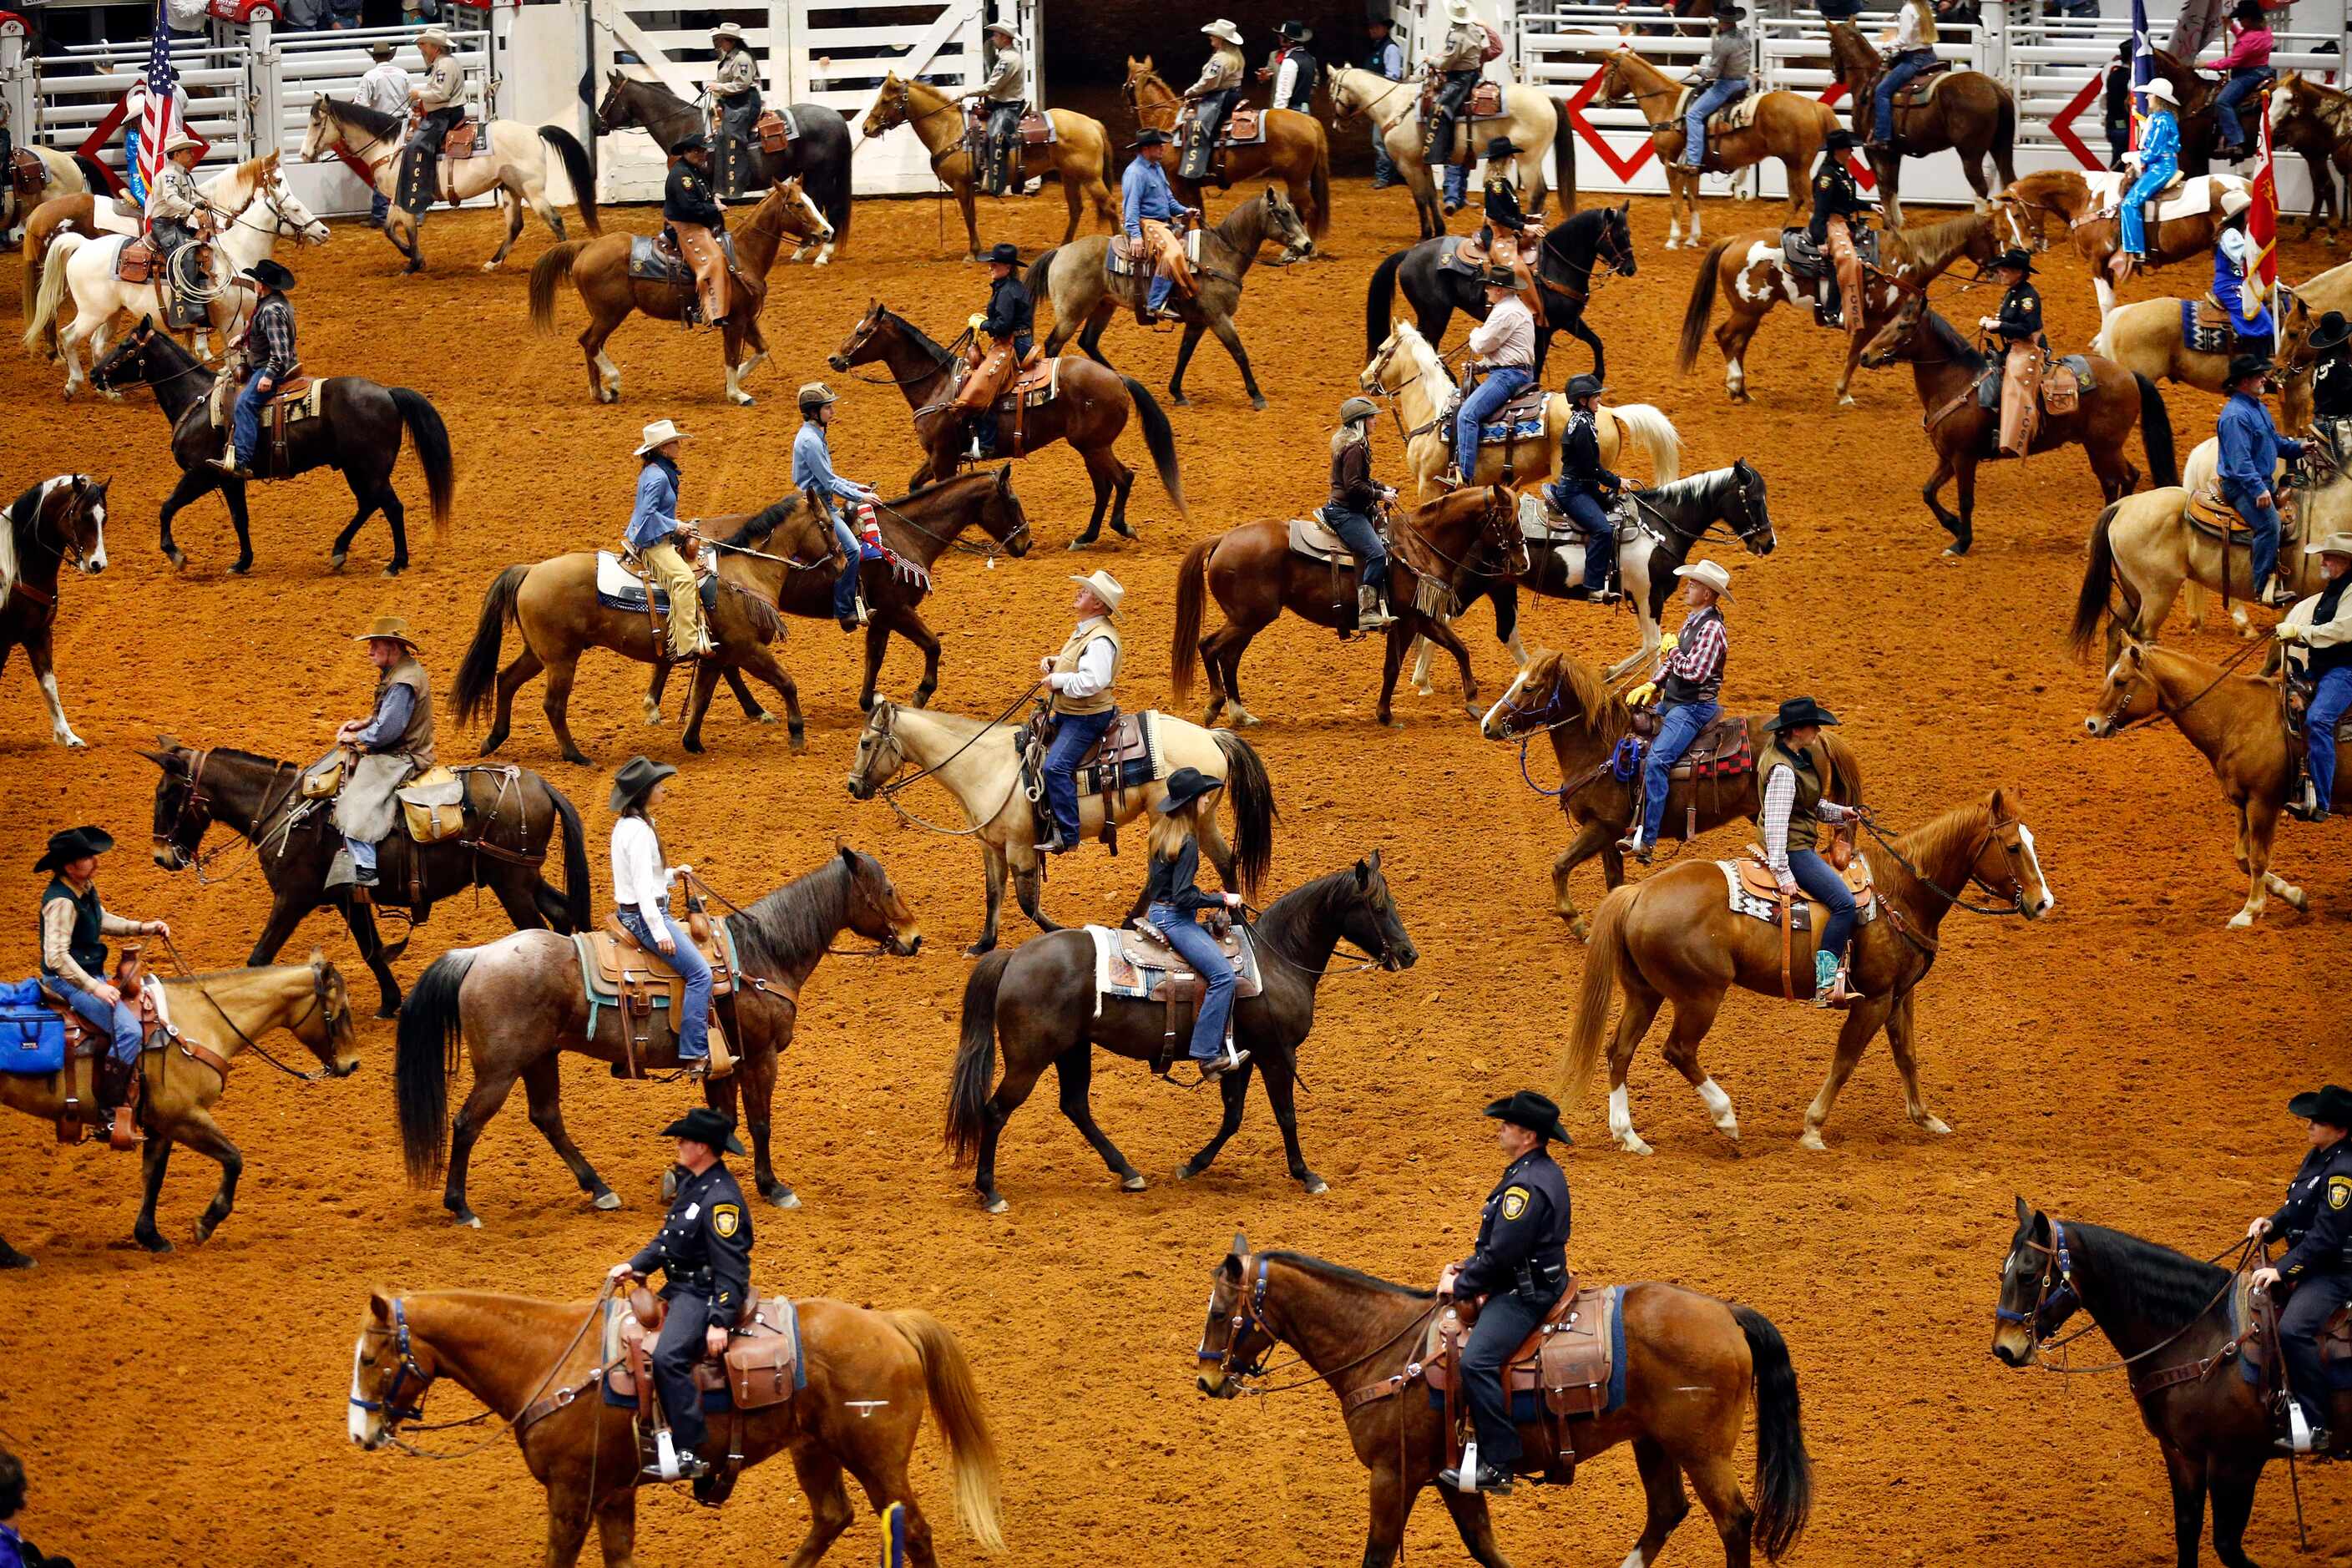 The grand entry kicks off the Professional Rodeo Cowboys Association rodeo at the Fort Worth...